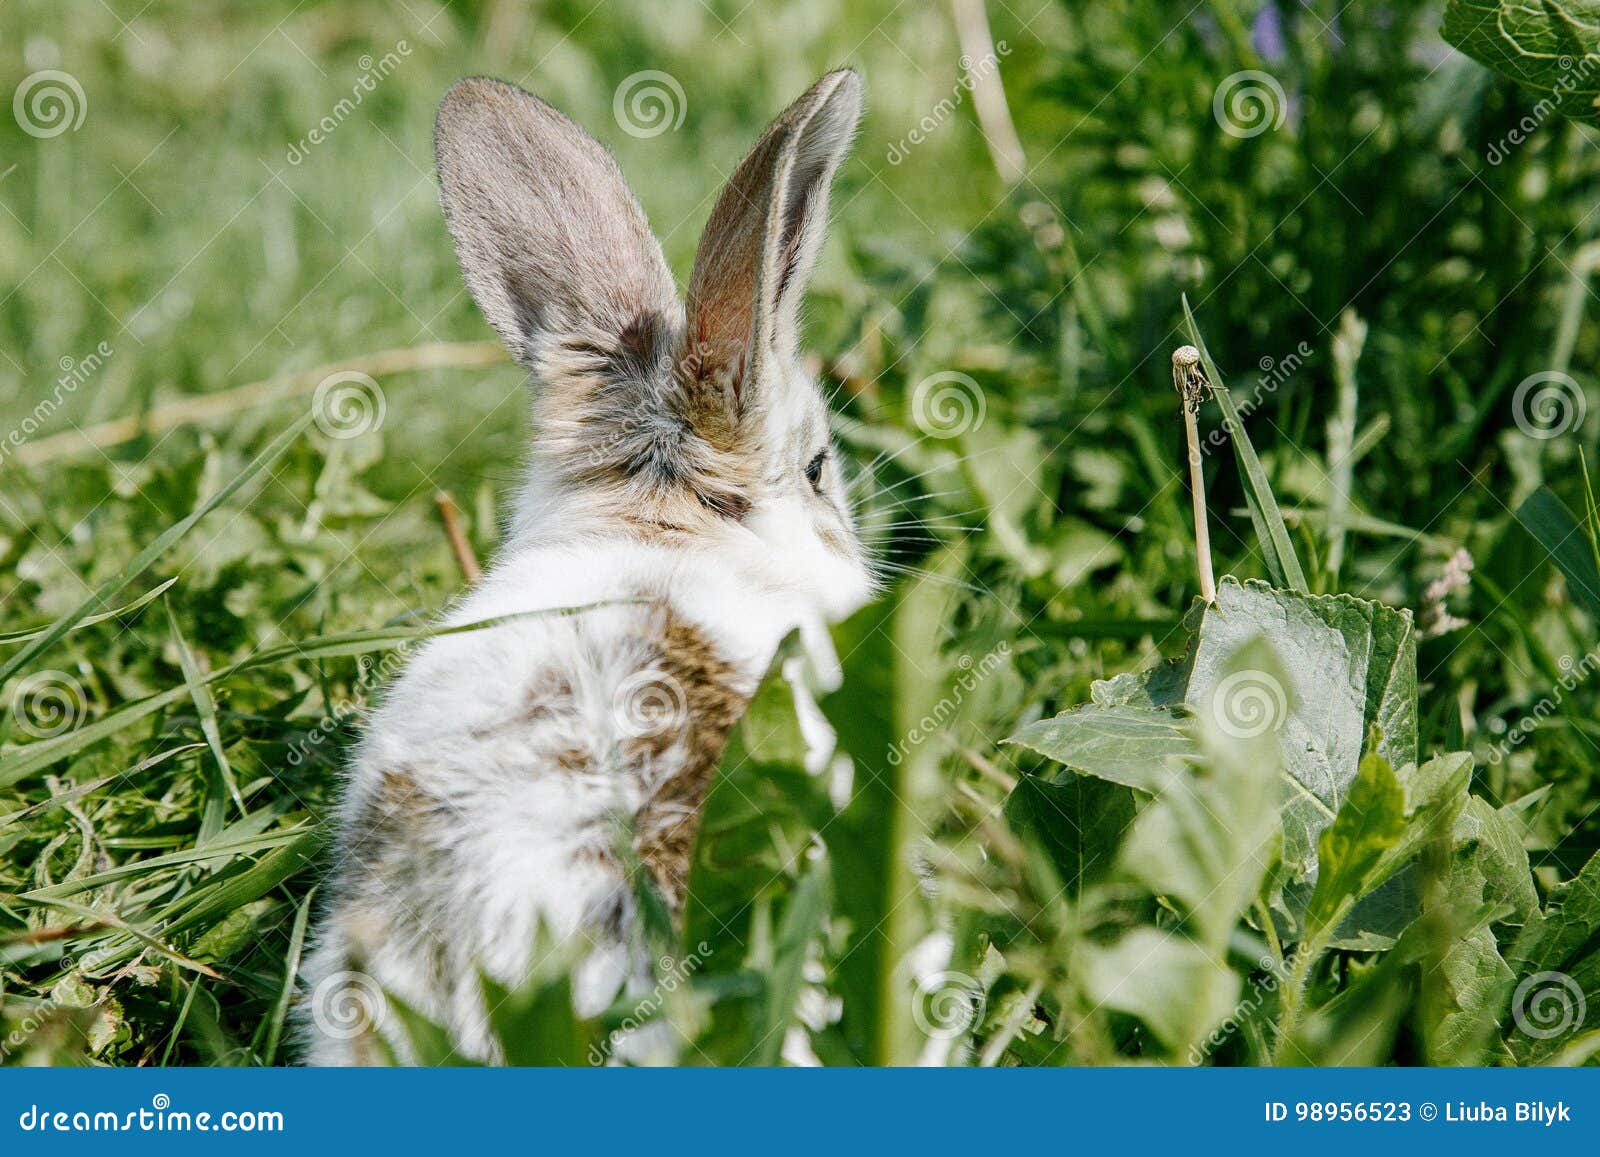 little rabbit, black and white suit, a bunny eating a green grass, a pet in a wooden box.